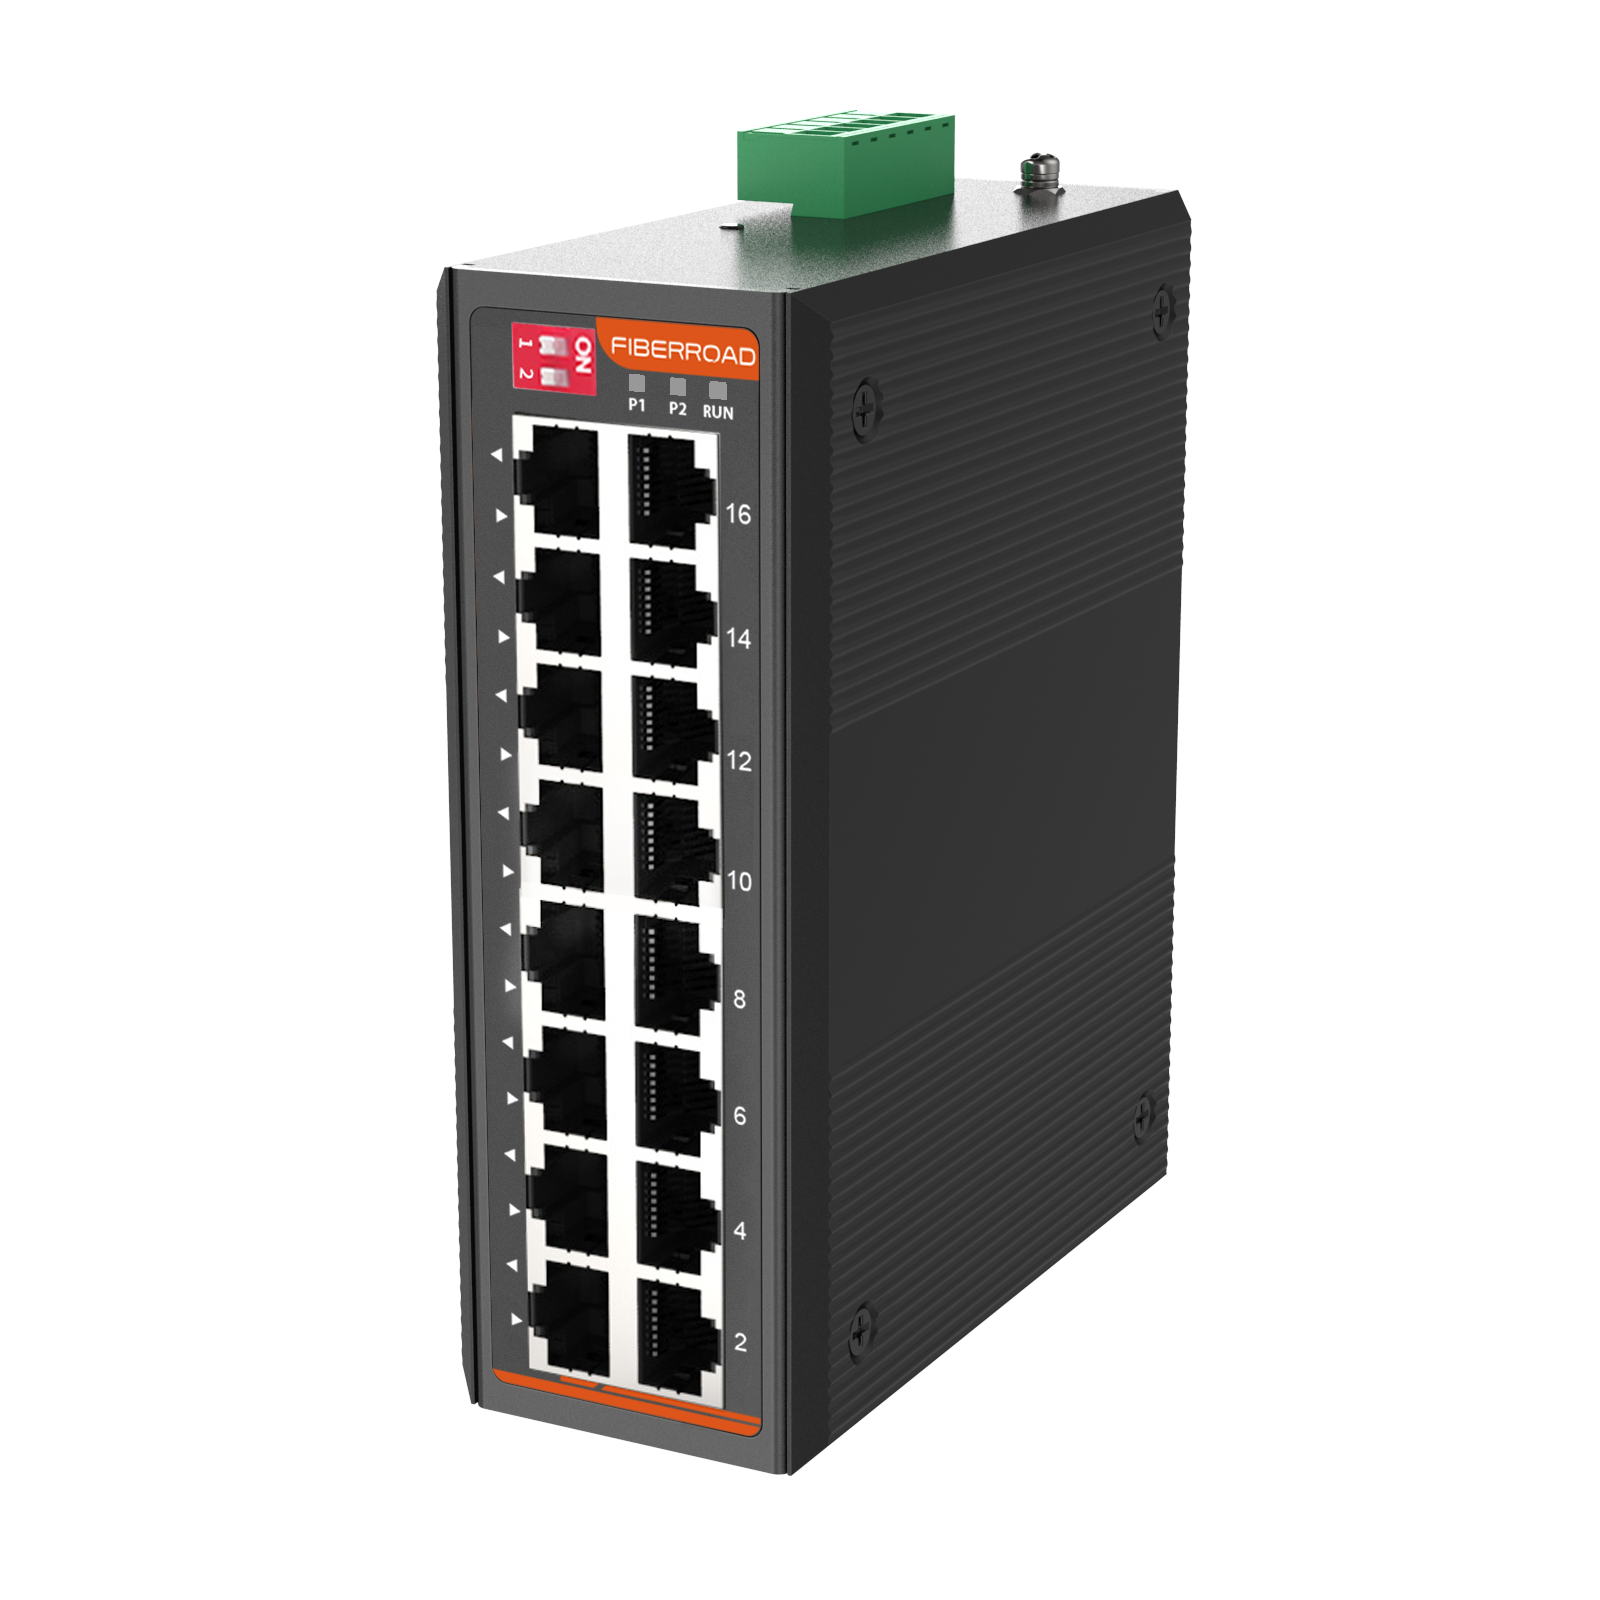 16-port unmanaged Ethernet switches